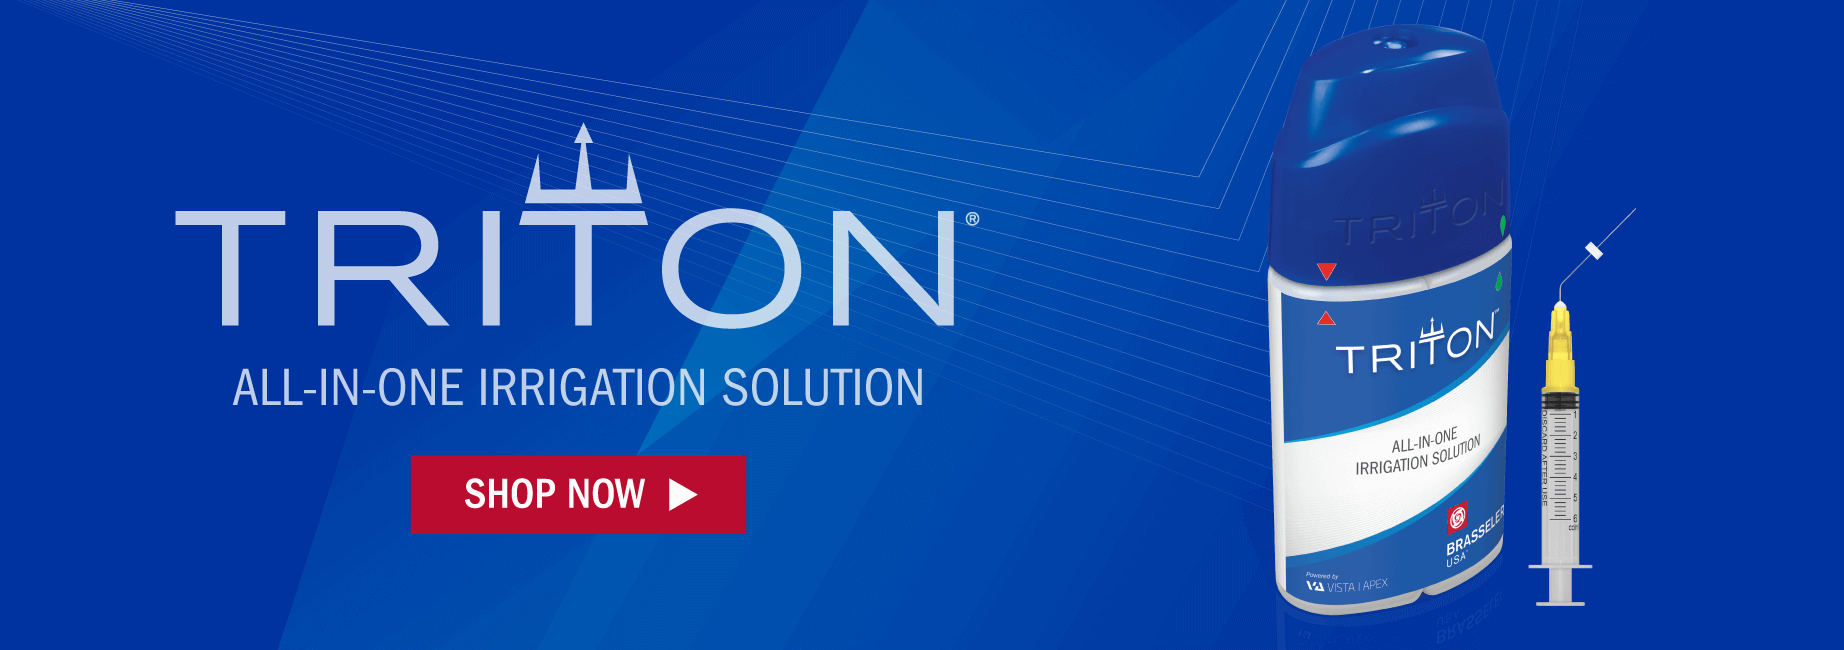 Triton All-In-One Irrigation Solution.